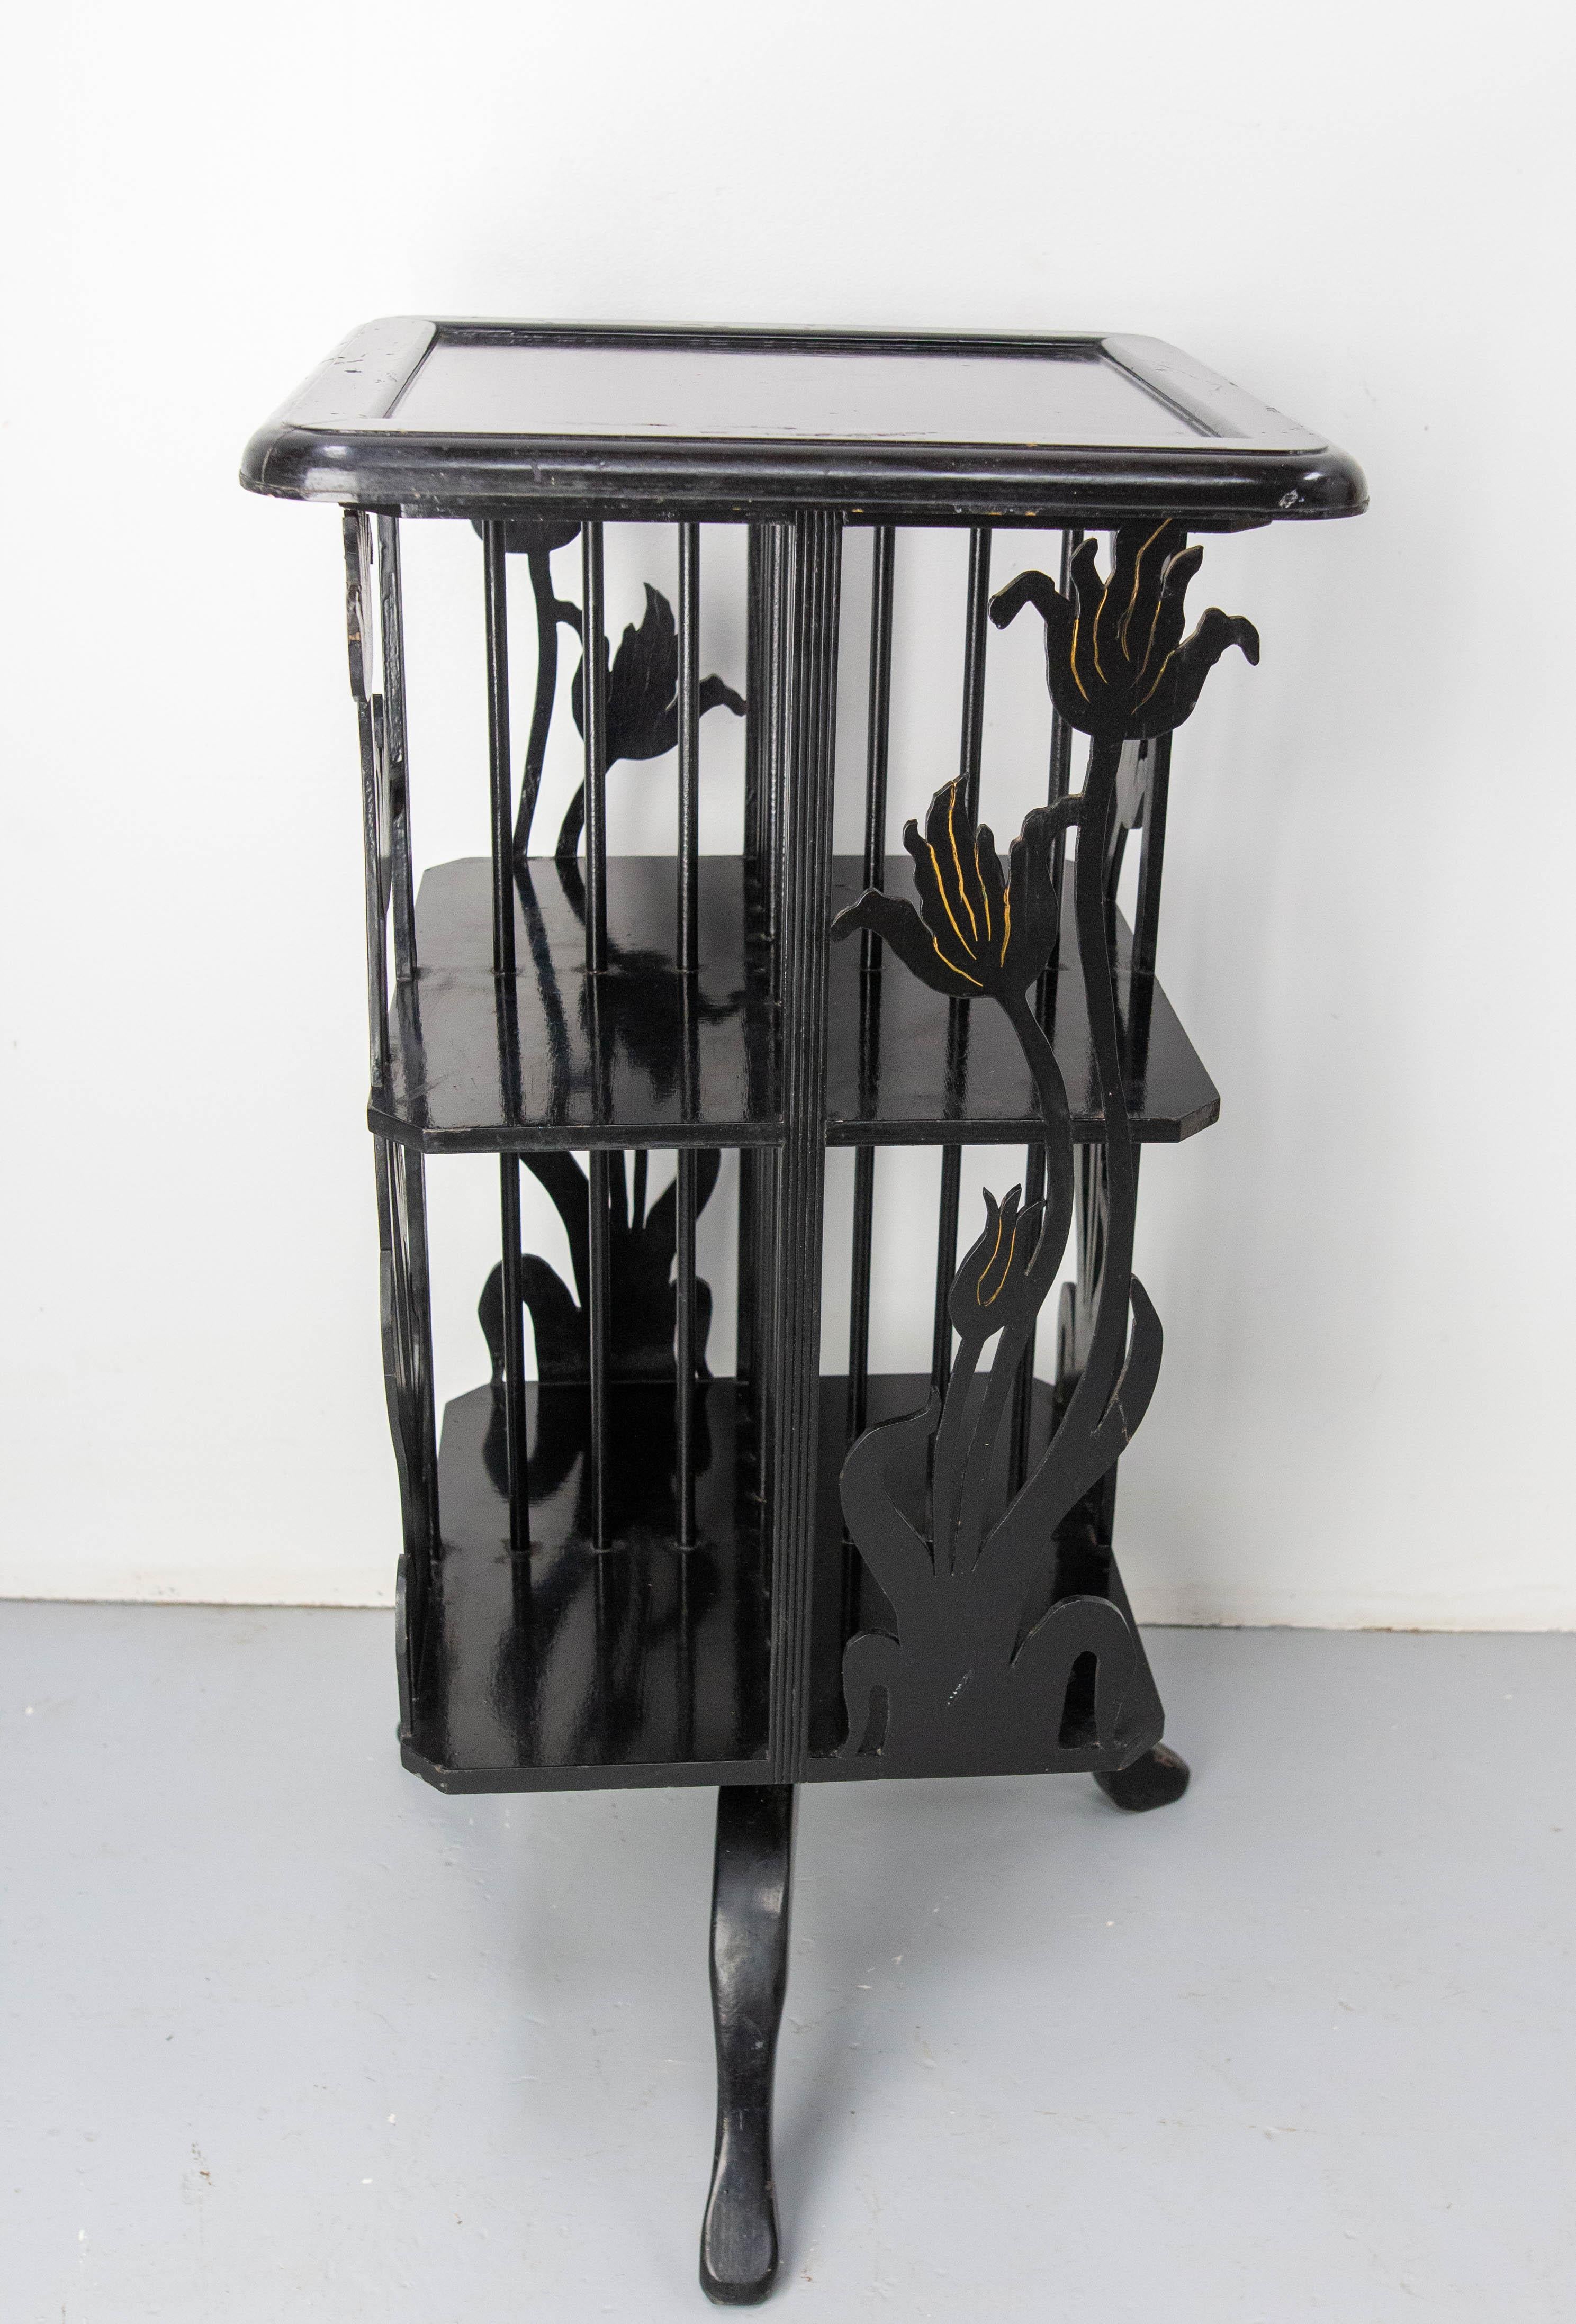 Antique rotating library or spinning bookcase, black lacquered.
Made circa 1910-1020 in the art nouveau period. The flowers are peony which are flowers typically used during the french art nouveau period.
Top dimension: 18.11 x 18.11 in. (46 x 46